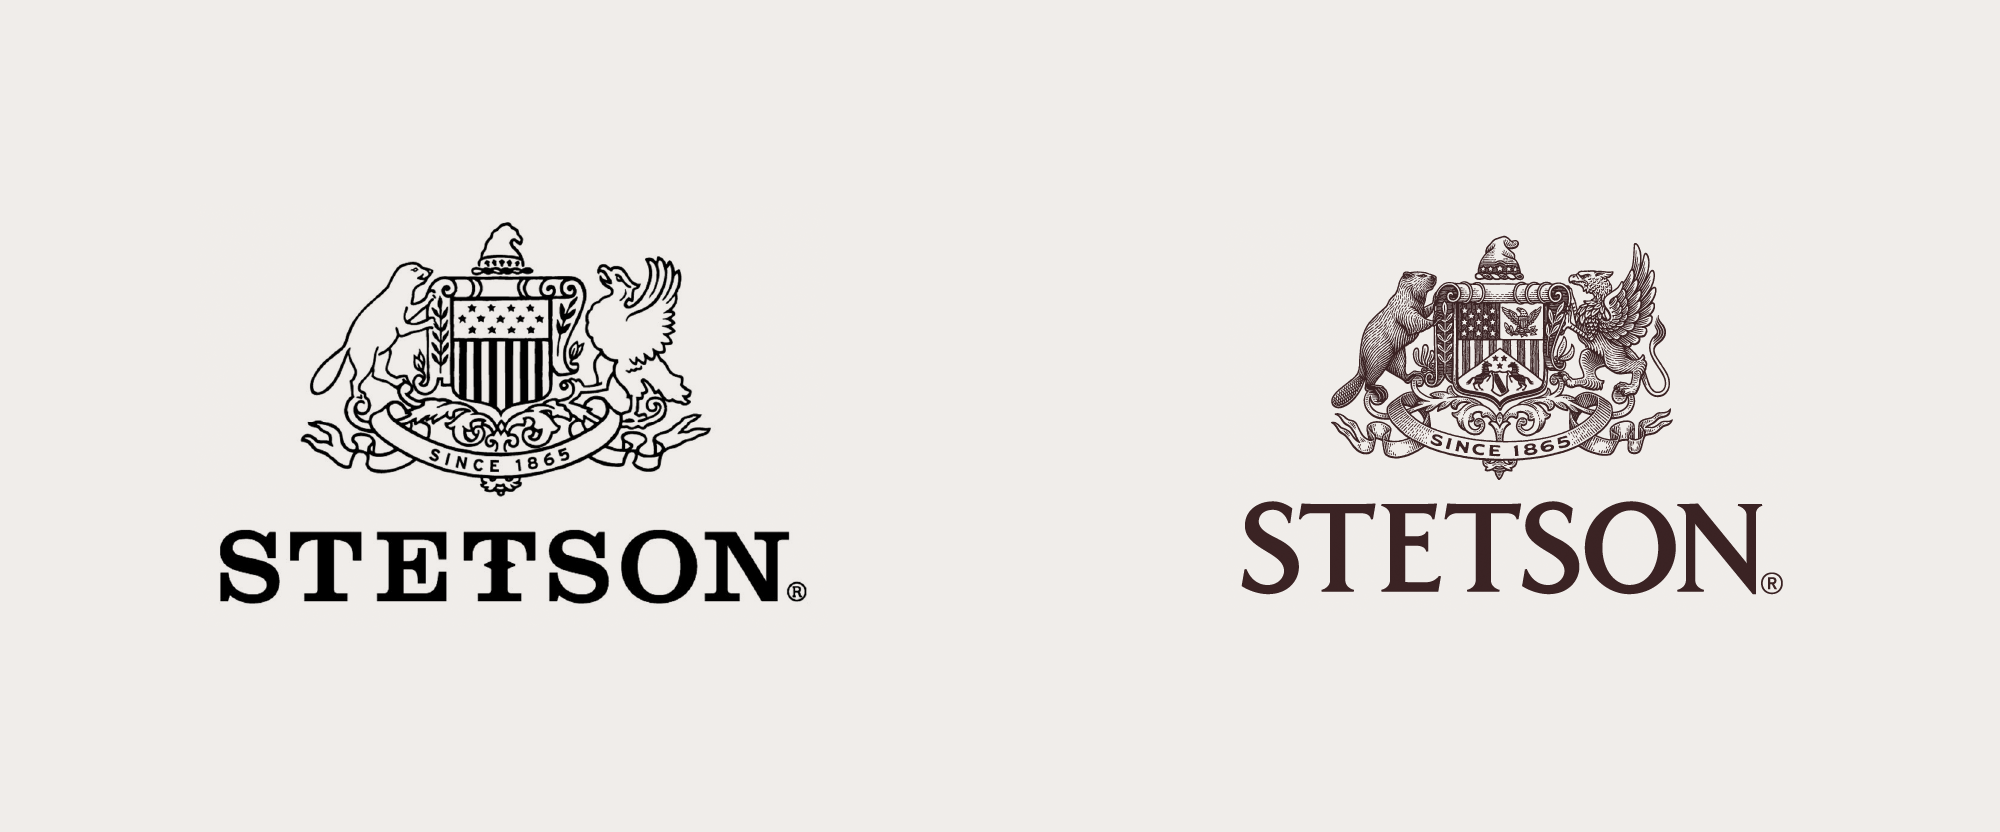 Brand New New Logo and Identity for Stetson by Tractorbeam